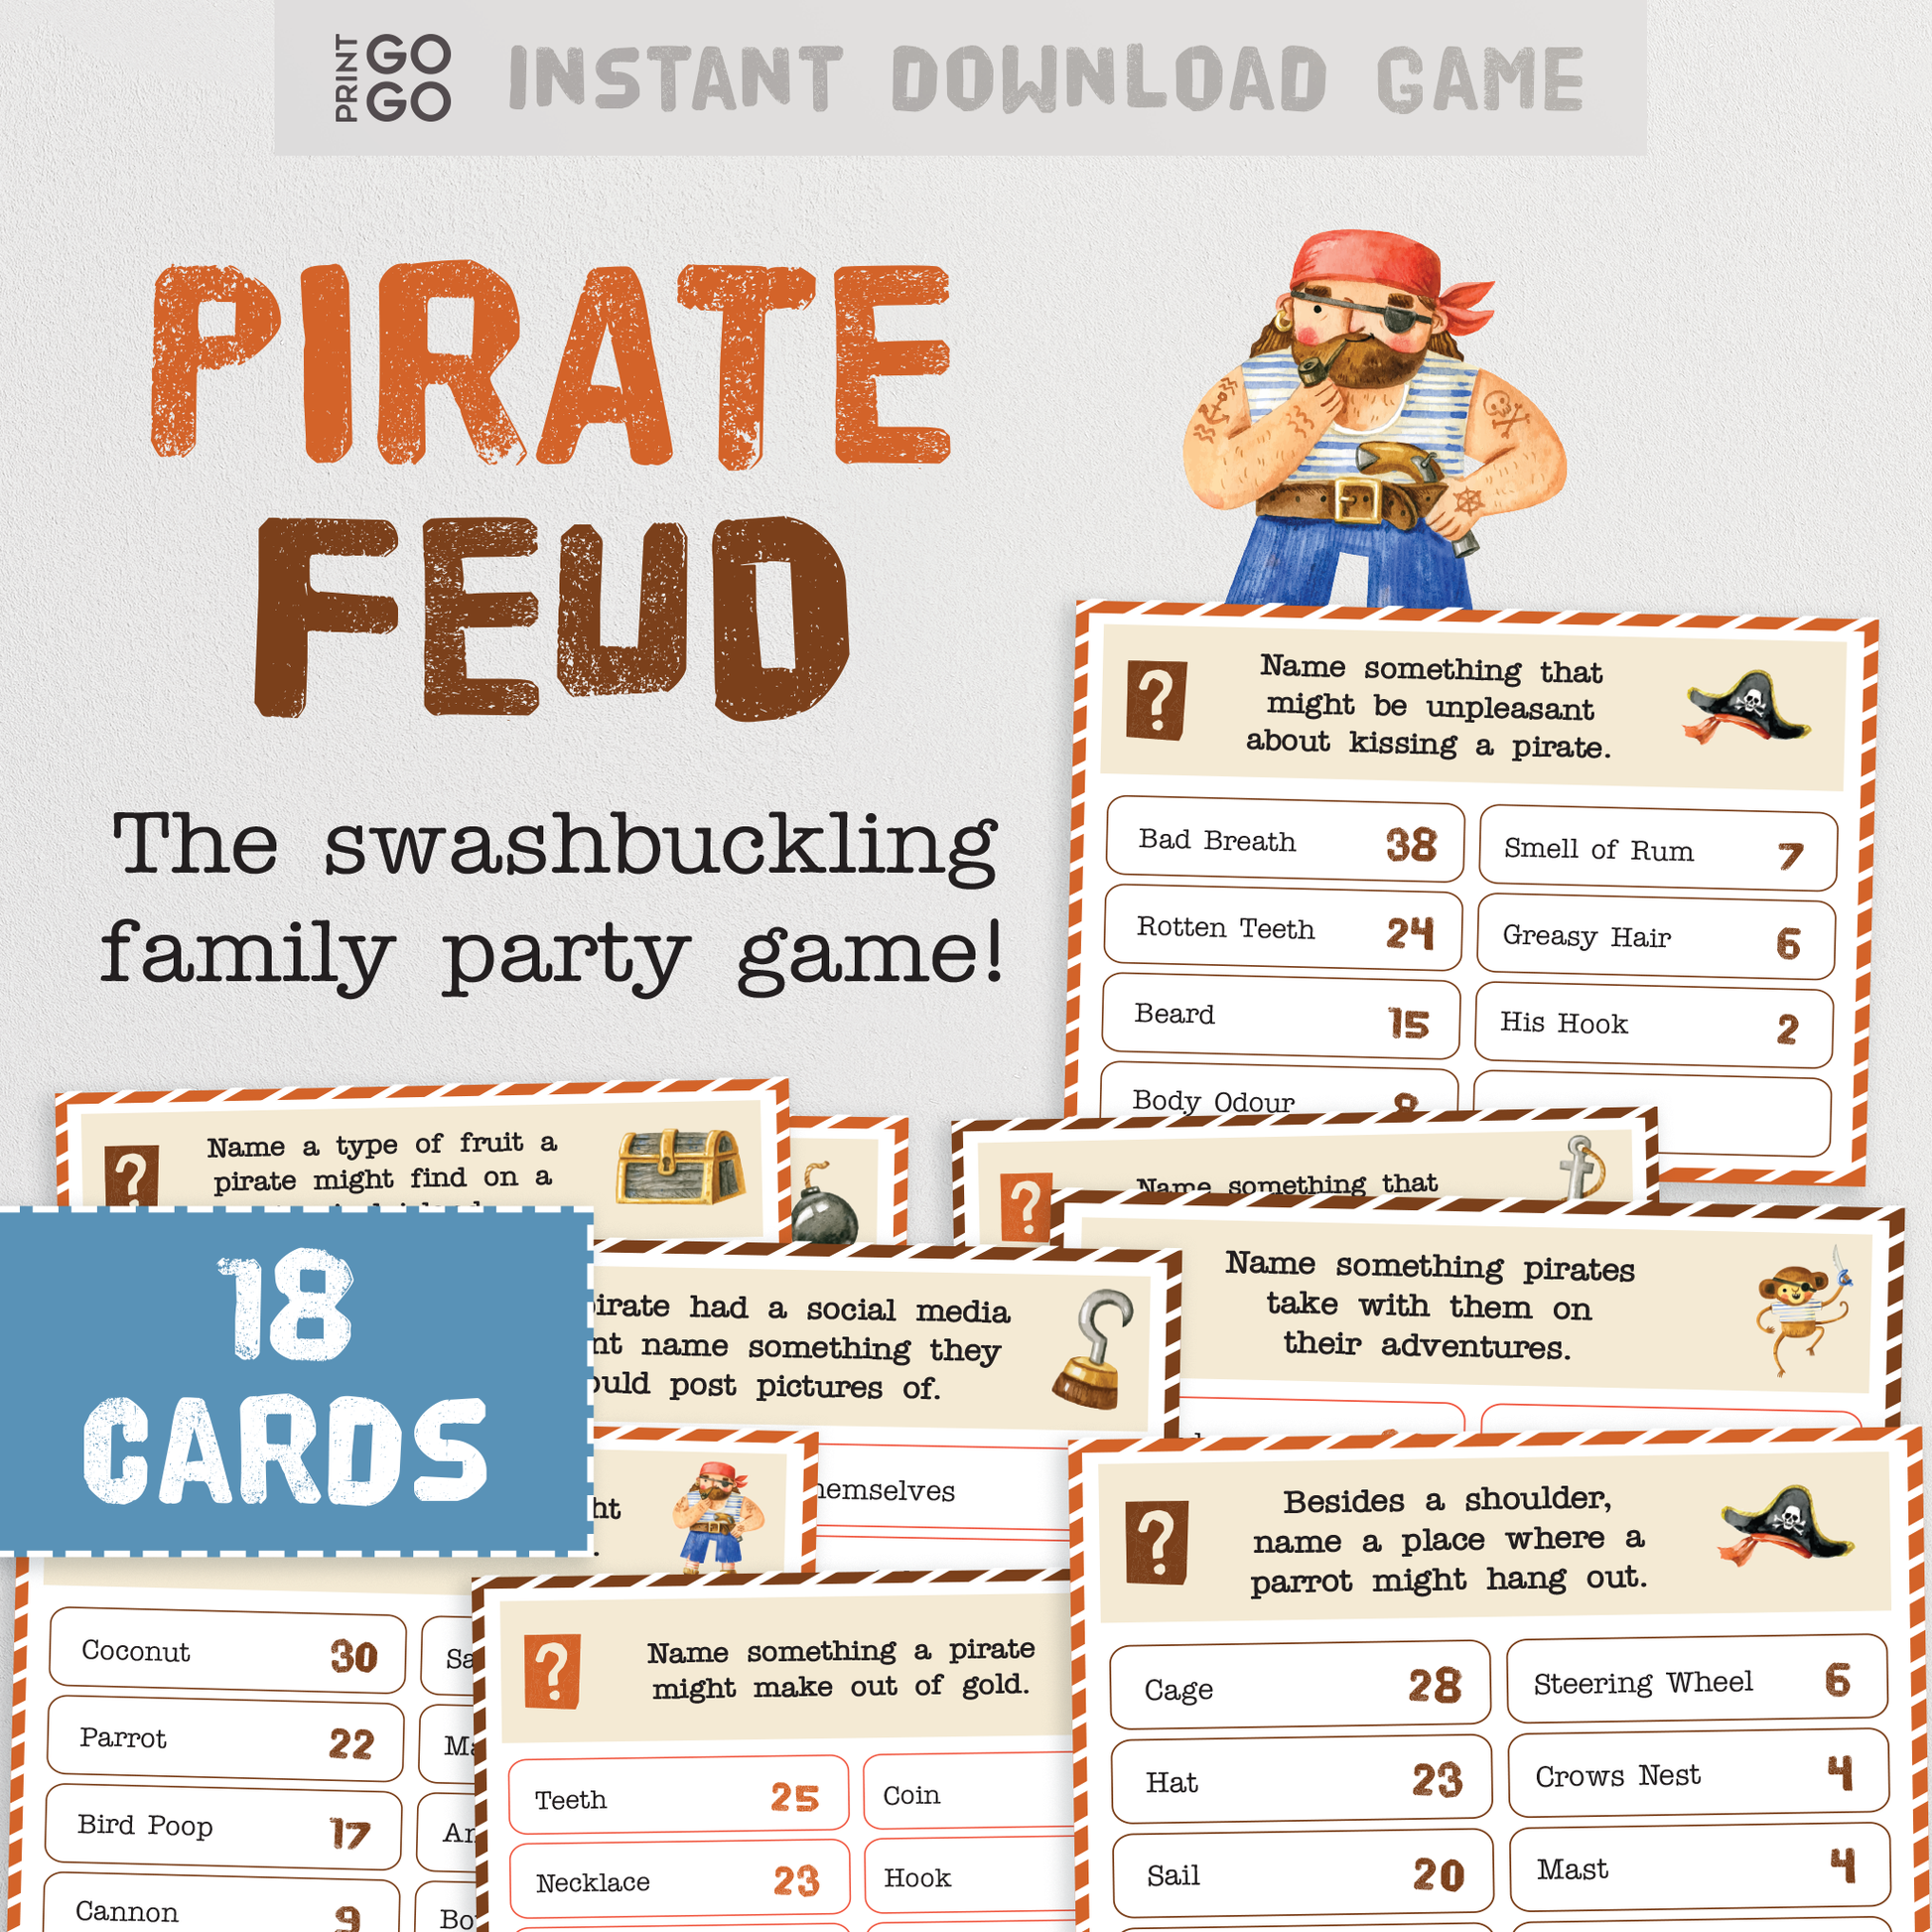 Pirate Feud - The Swashbuckling Duel for Top Answers and Points